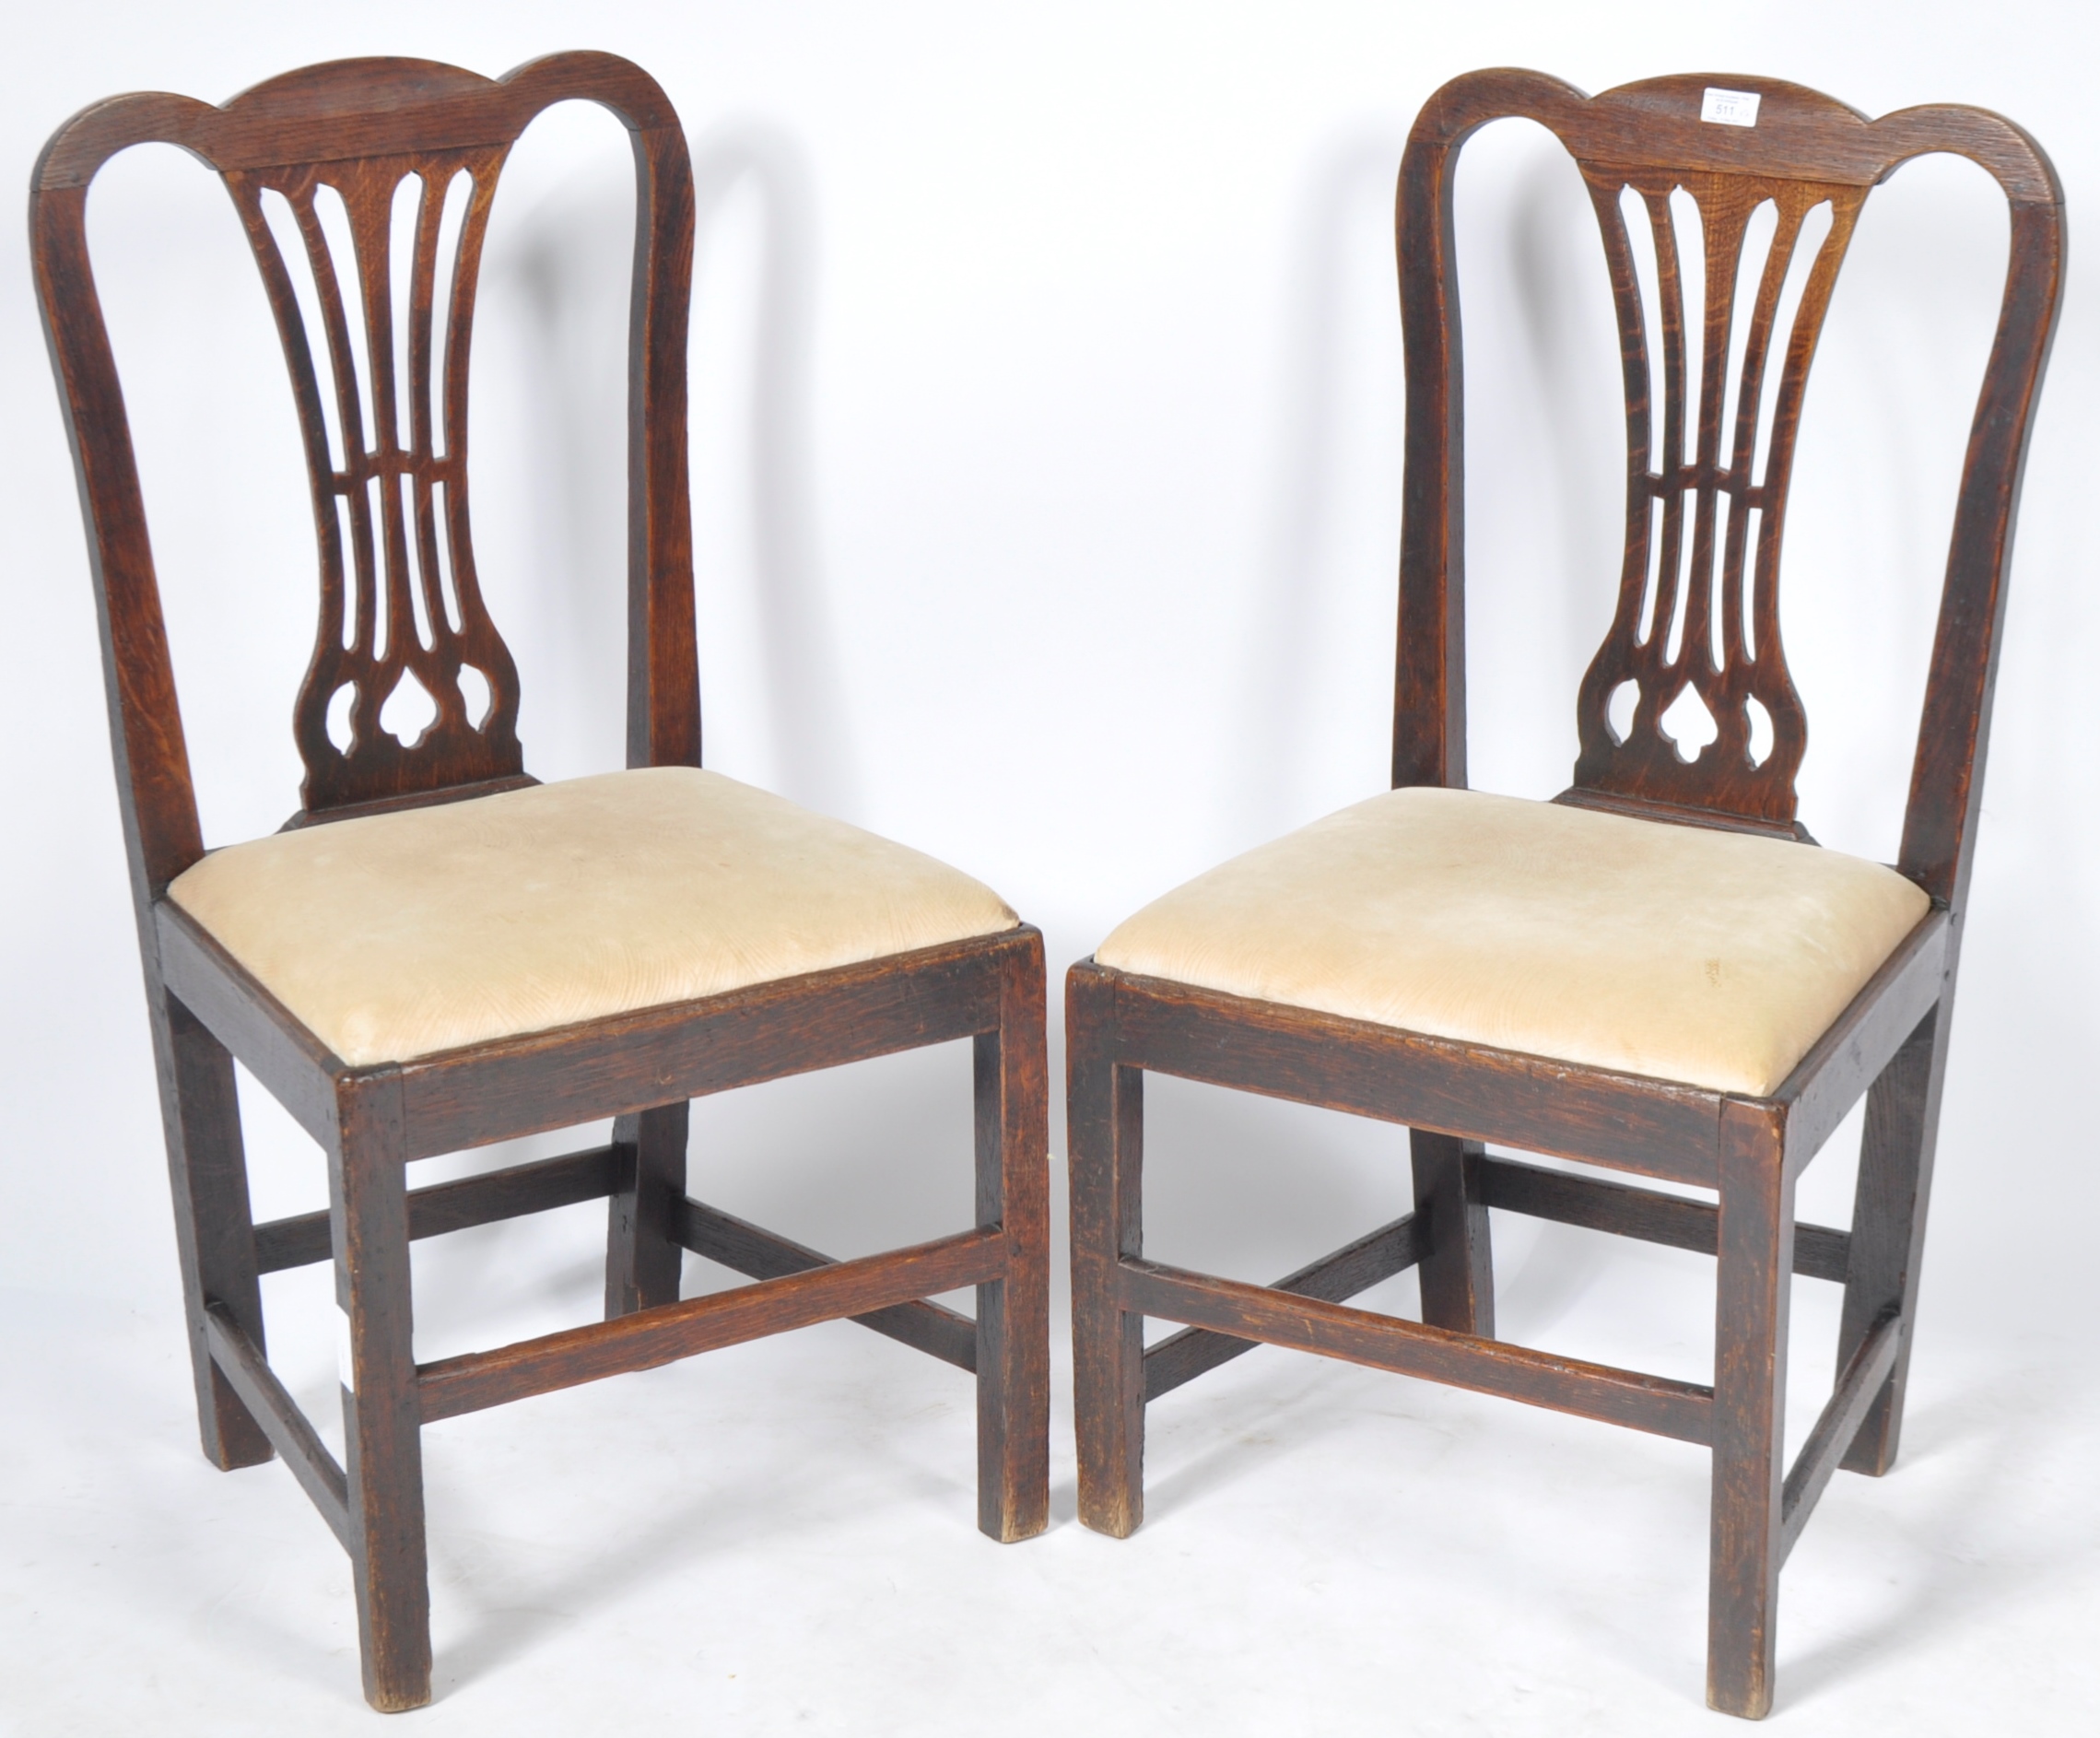 PAIR OF 18TH CENTURY CHIPPENDALE INFLUENCE ELM & OAK CHAIRS - Image 2 of 6